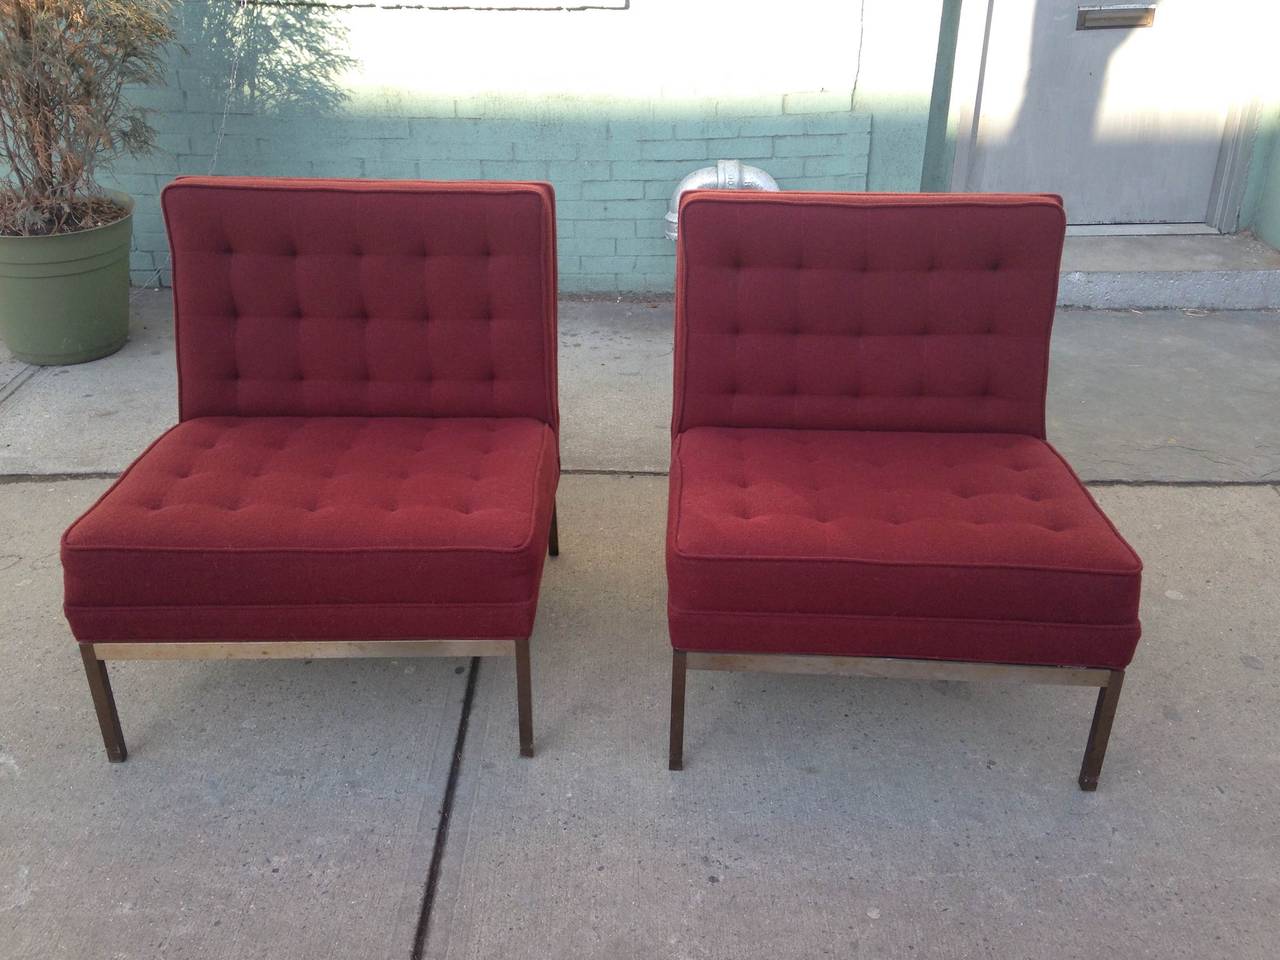 Pair of upholstered Lounge chairs designed by Florence Knoll for Knoll International in 1958, tubular steel frame, burgundy wool hopsack fabric.